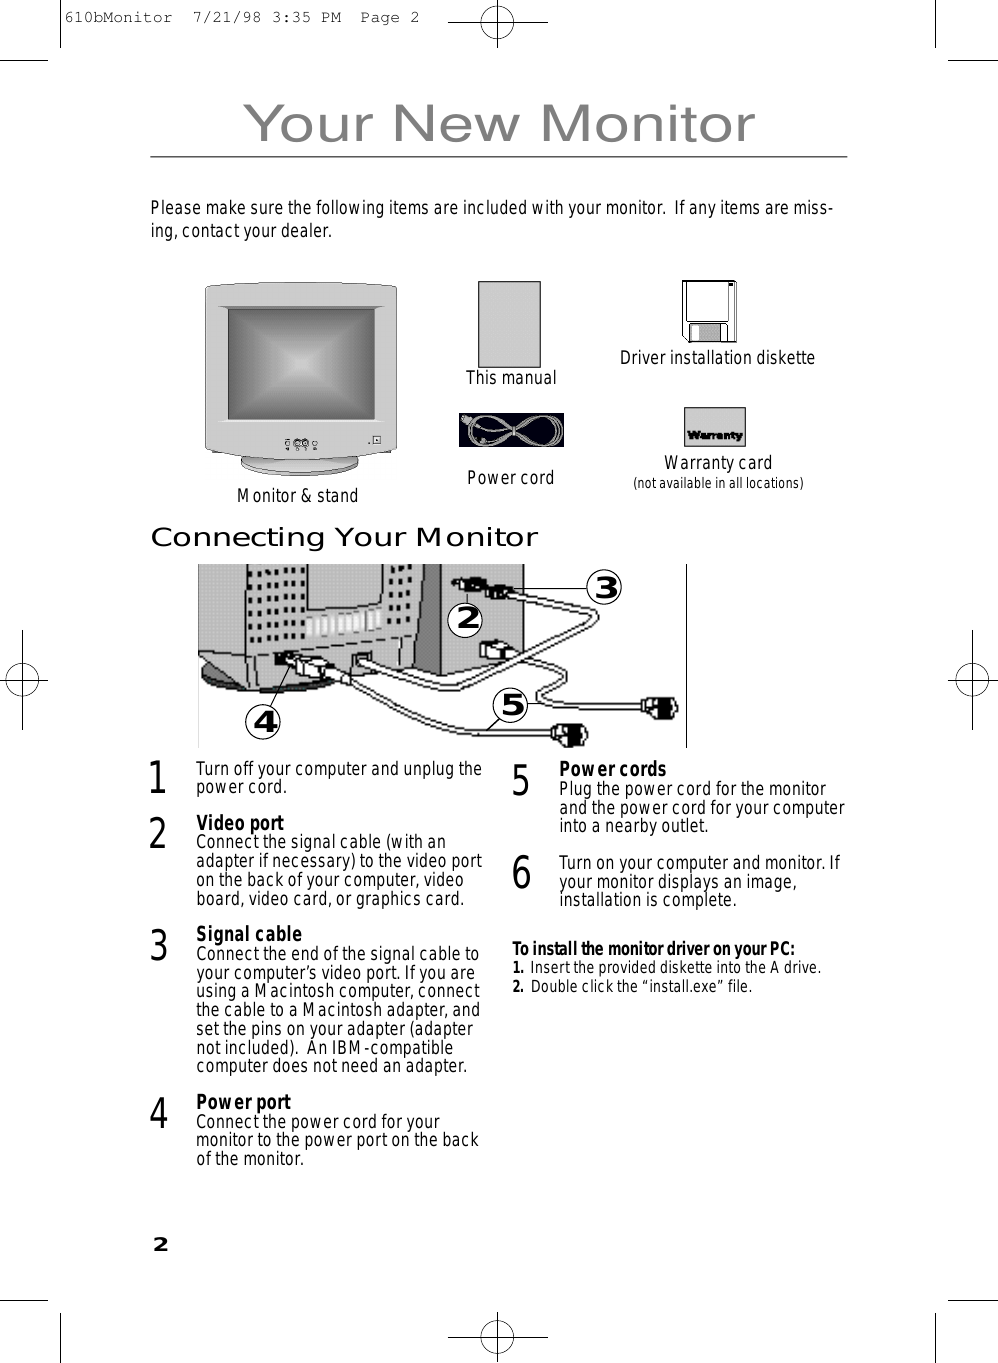 23Your New Monitor4531Turn off your computer and unplug thepower cord.2Video portConnect the signal cable (with anadapter if necessary) to the video porton the back of your computer, videoboard, video card, or graphics card.3Signal cableConnect the end of the signal cable toyour computer’s video port. If you areusing a Macintosh computer, connectthe cable to a Macintosh adapter, andset the pins on your adapter (adapternot included).  An IBM-compatiblecomputer does not need an adapter.4Power portConnect the power cord for yourmonitor to the power port on the backof the monitor.5Power cordsPlug the power cord for the monitorand the power cord for your computerinto a nearby outlet.6Turn on your computer and monitor. Ifyour monitor displays an image,installation is complete.To install the monitor driver on your PC:1.  Insert the provided diskette into the A drive.2.  Double click the “install.exe” file. Connecting Your MonitorPlease make sure the following items are included with your monitor.  If any items are miss-ing, contact your dealer.This manualPower cordMonitor &amp; standWarranty card(not available in all locations)Driver installation diskette2610bMonitor  7/21/98 3:35 PM  Page 2